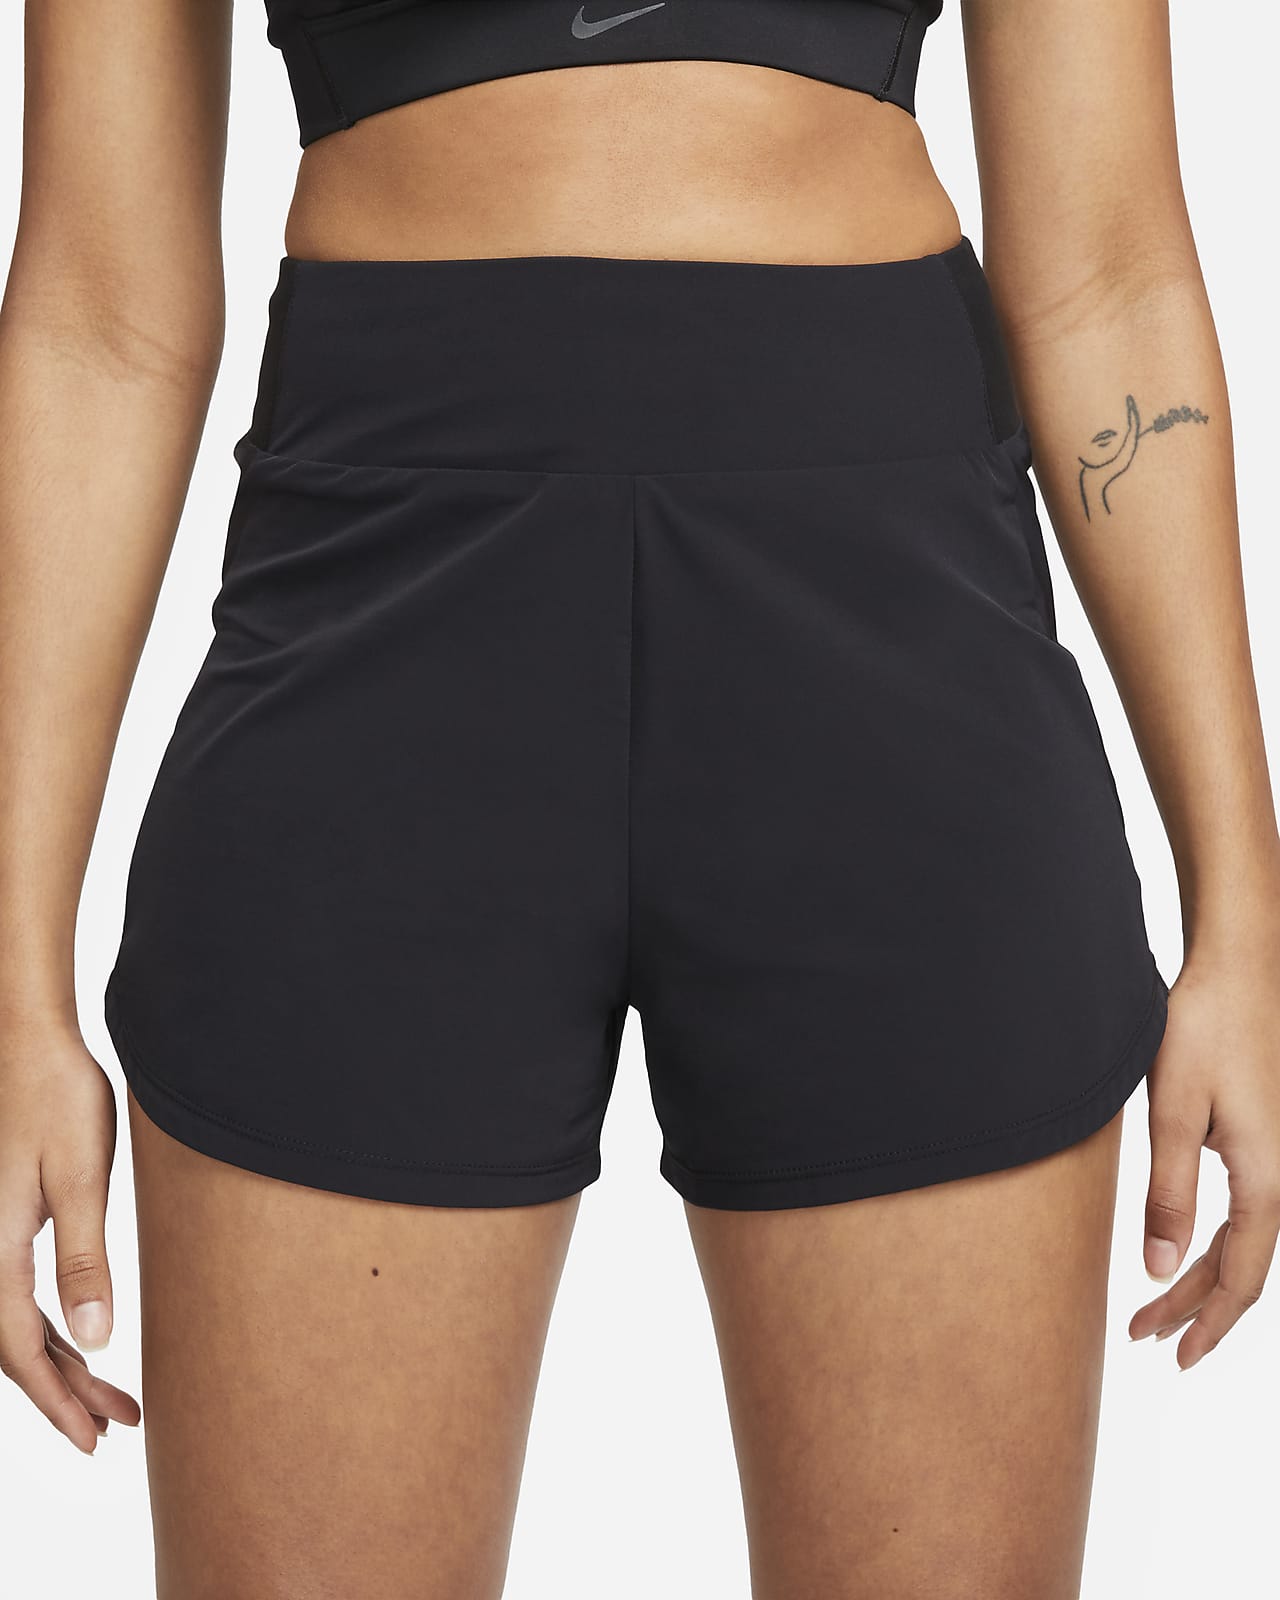 Fitness Women\'s Shorts. High-Waisted Bliss Nike Brief-Lined 3\